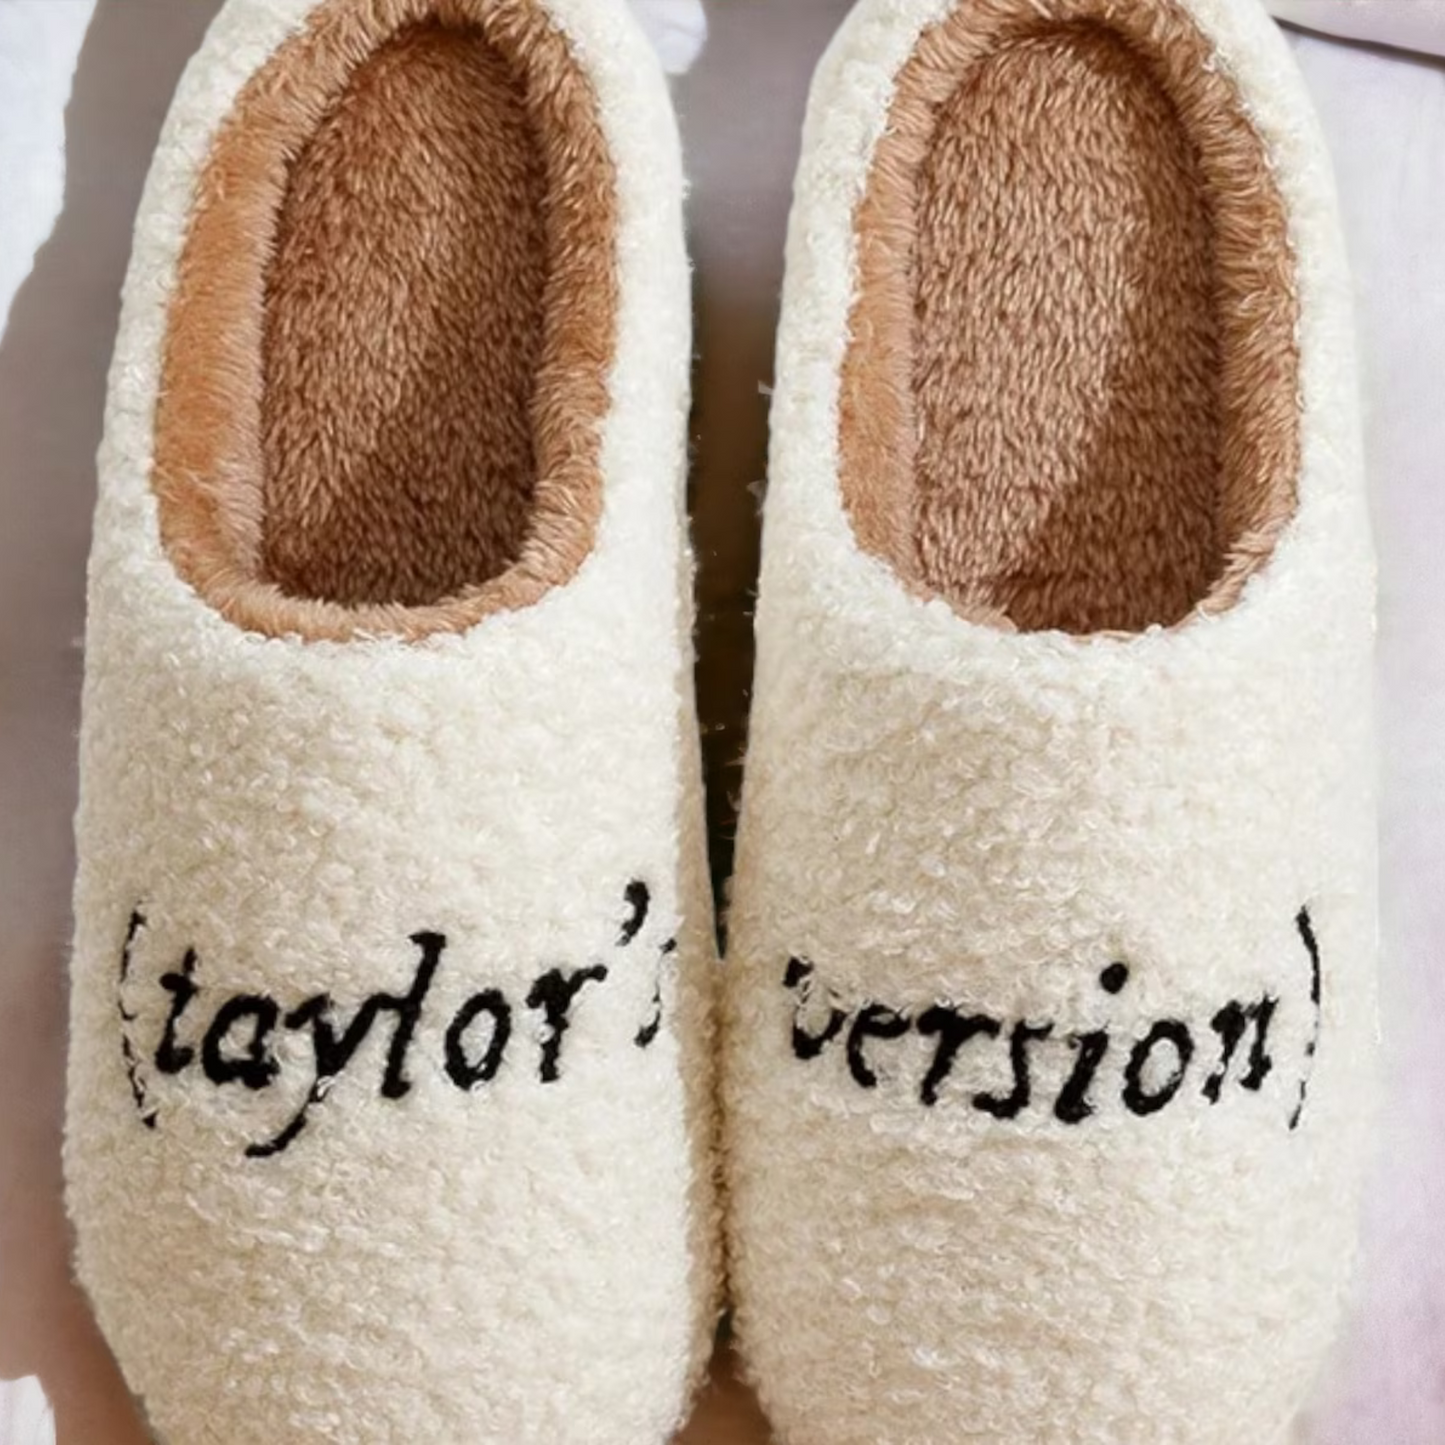 Taylors Version Slippers with black text